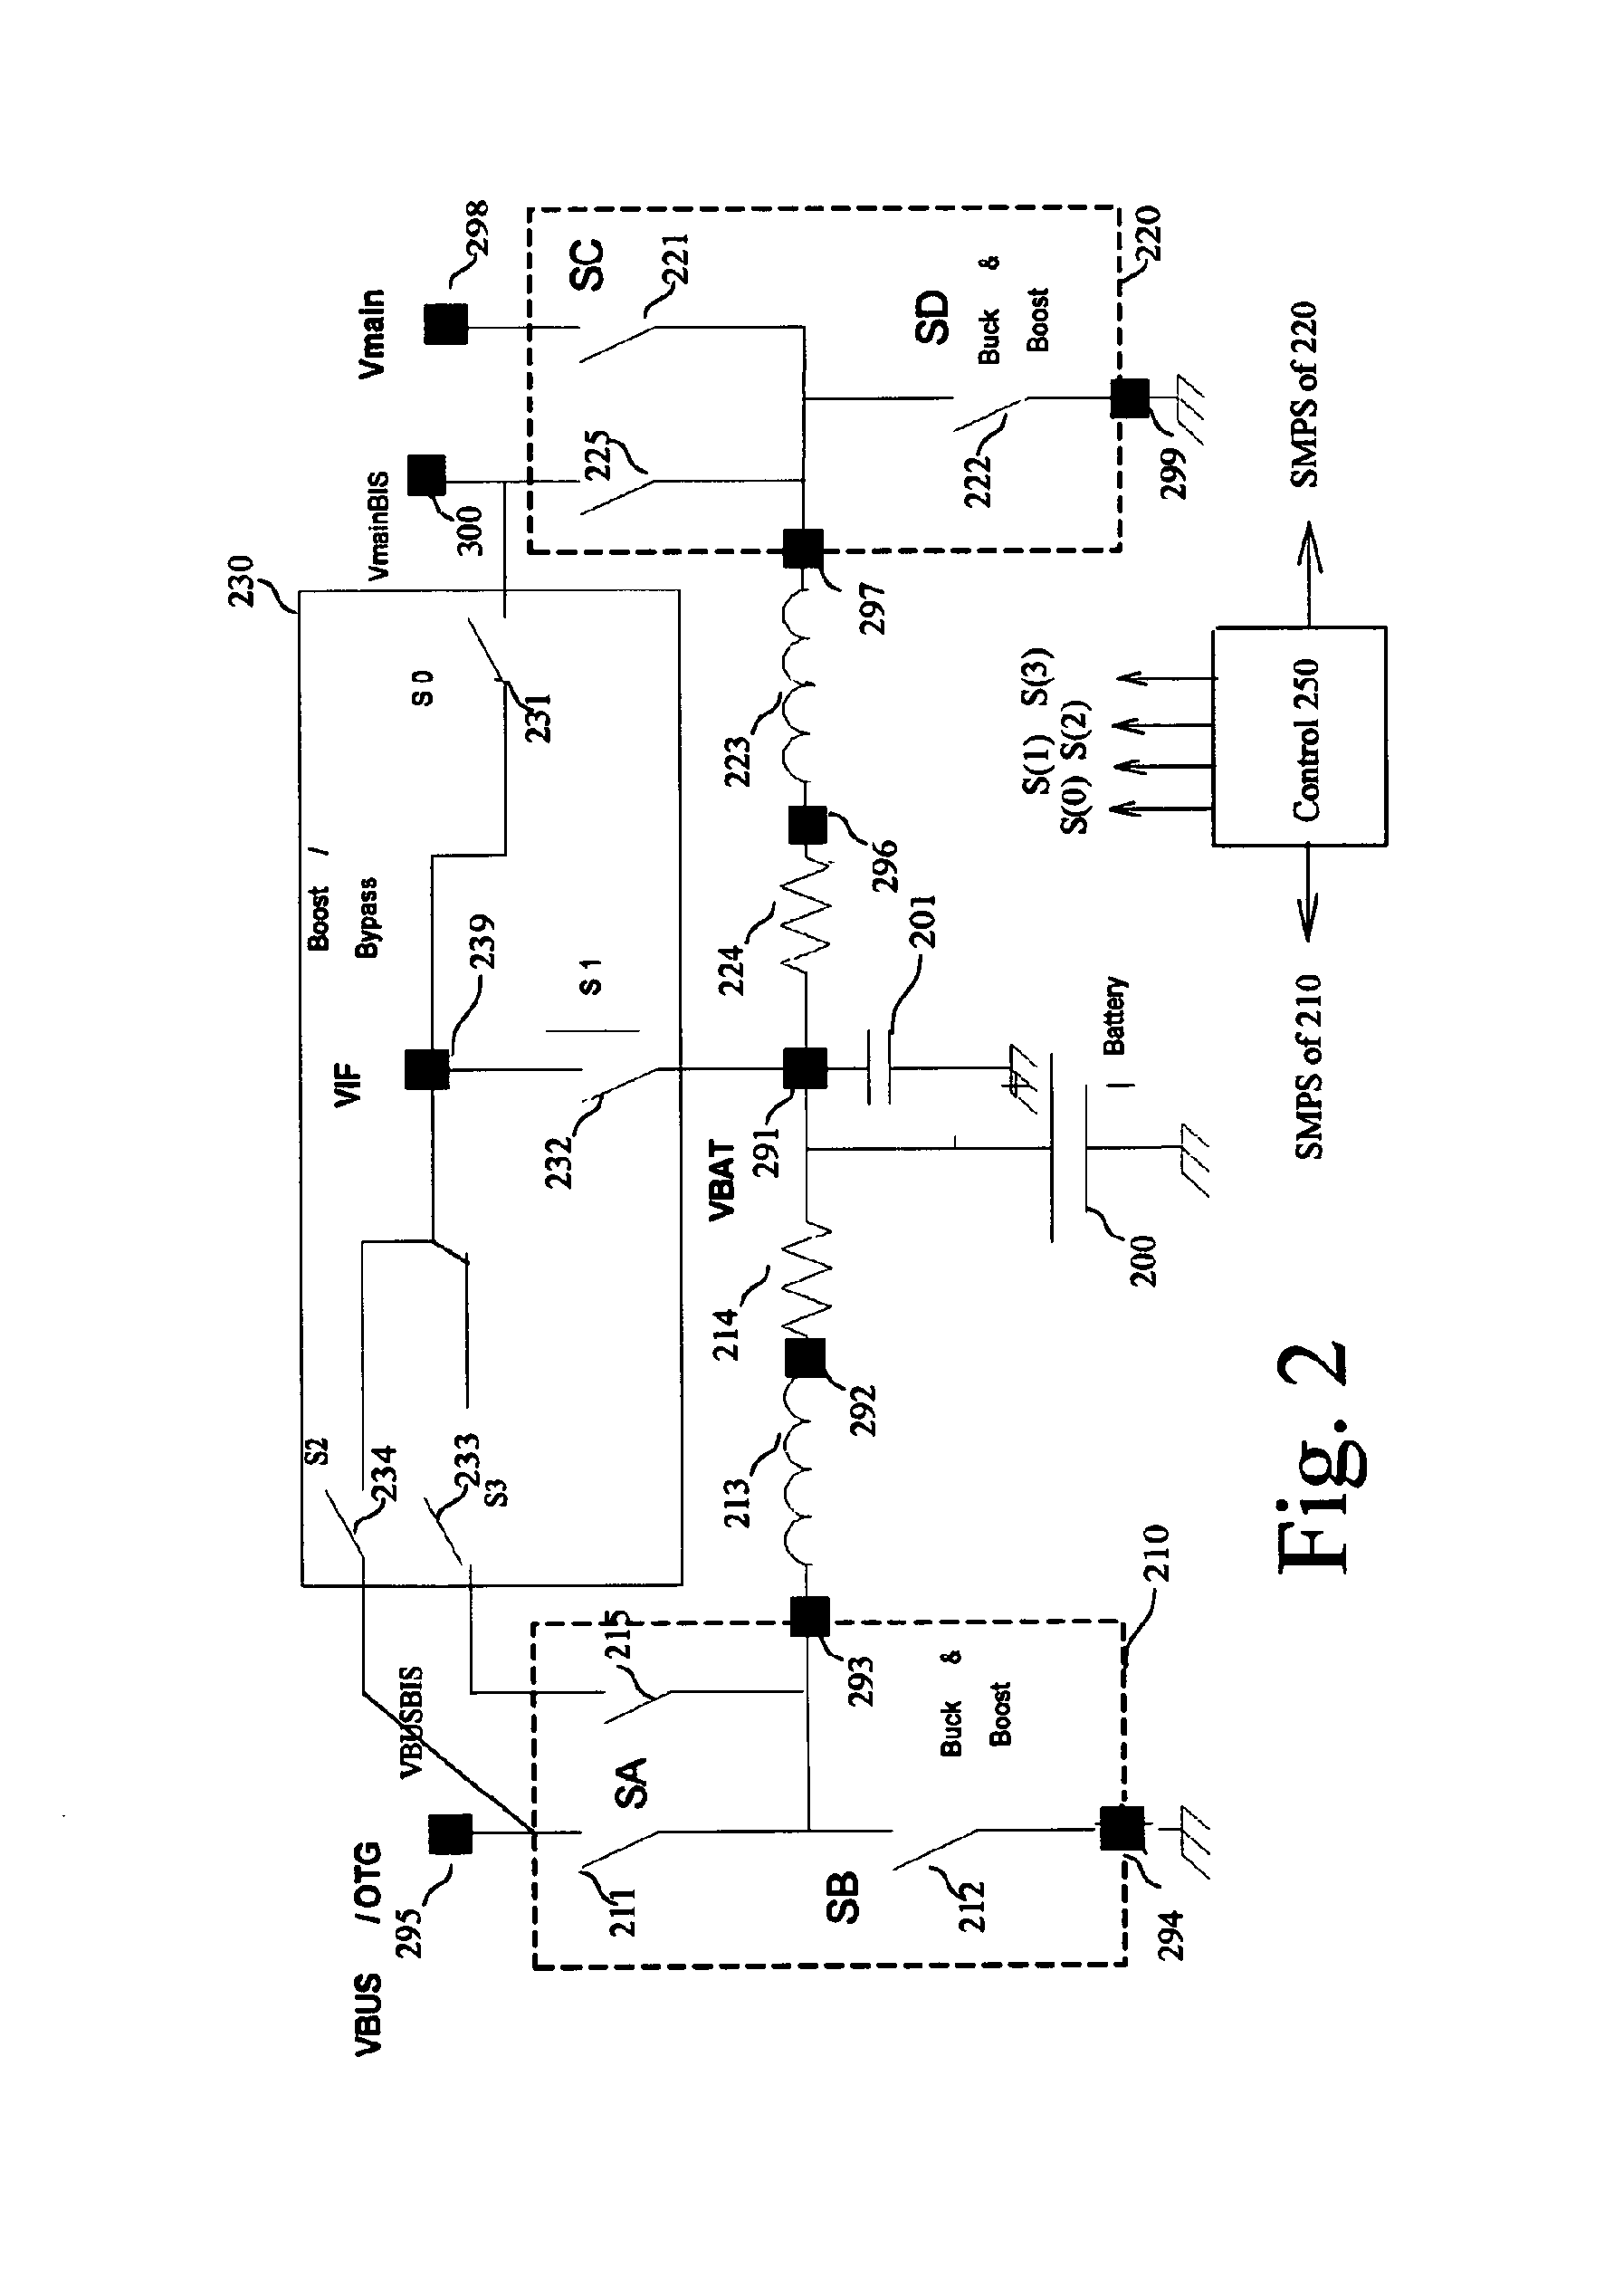 Power management circuit for a portable electronic device including USB functionality and method for doing the same